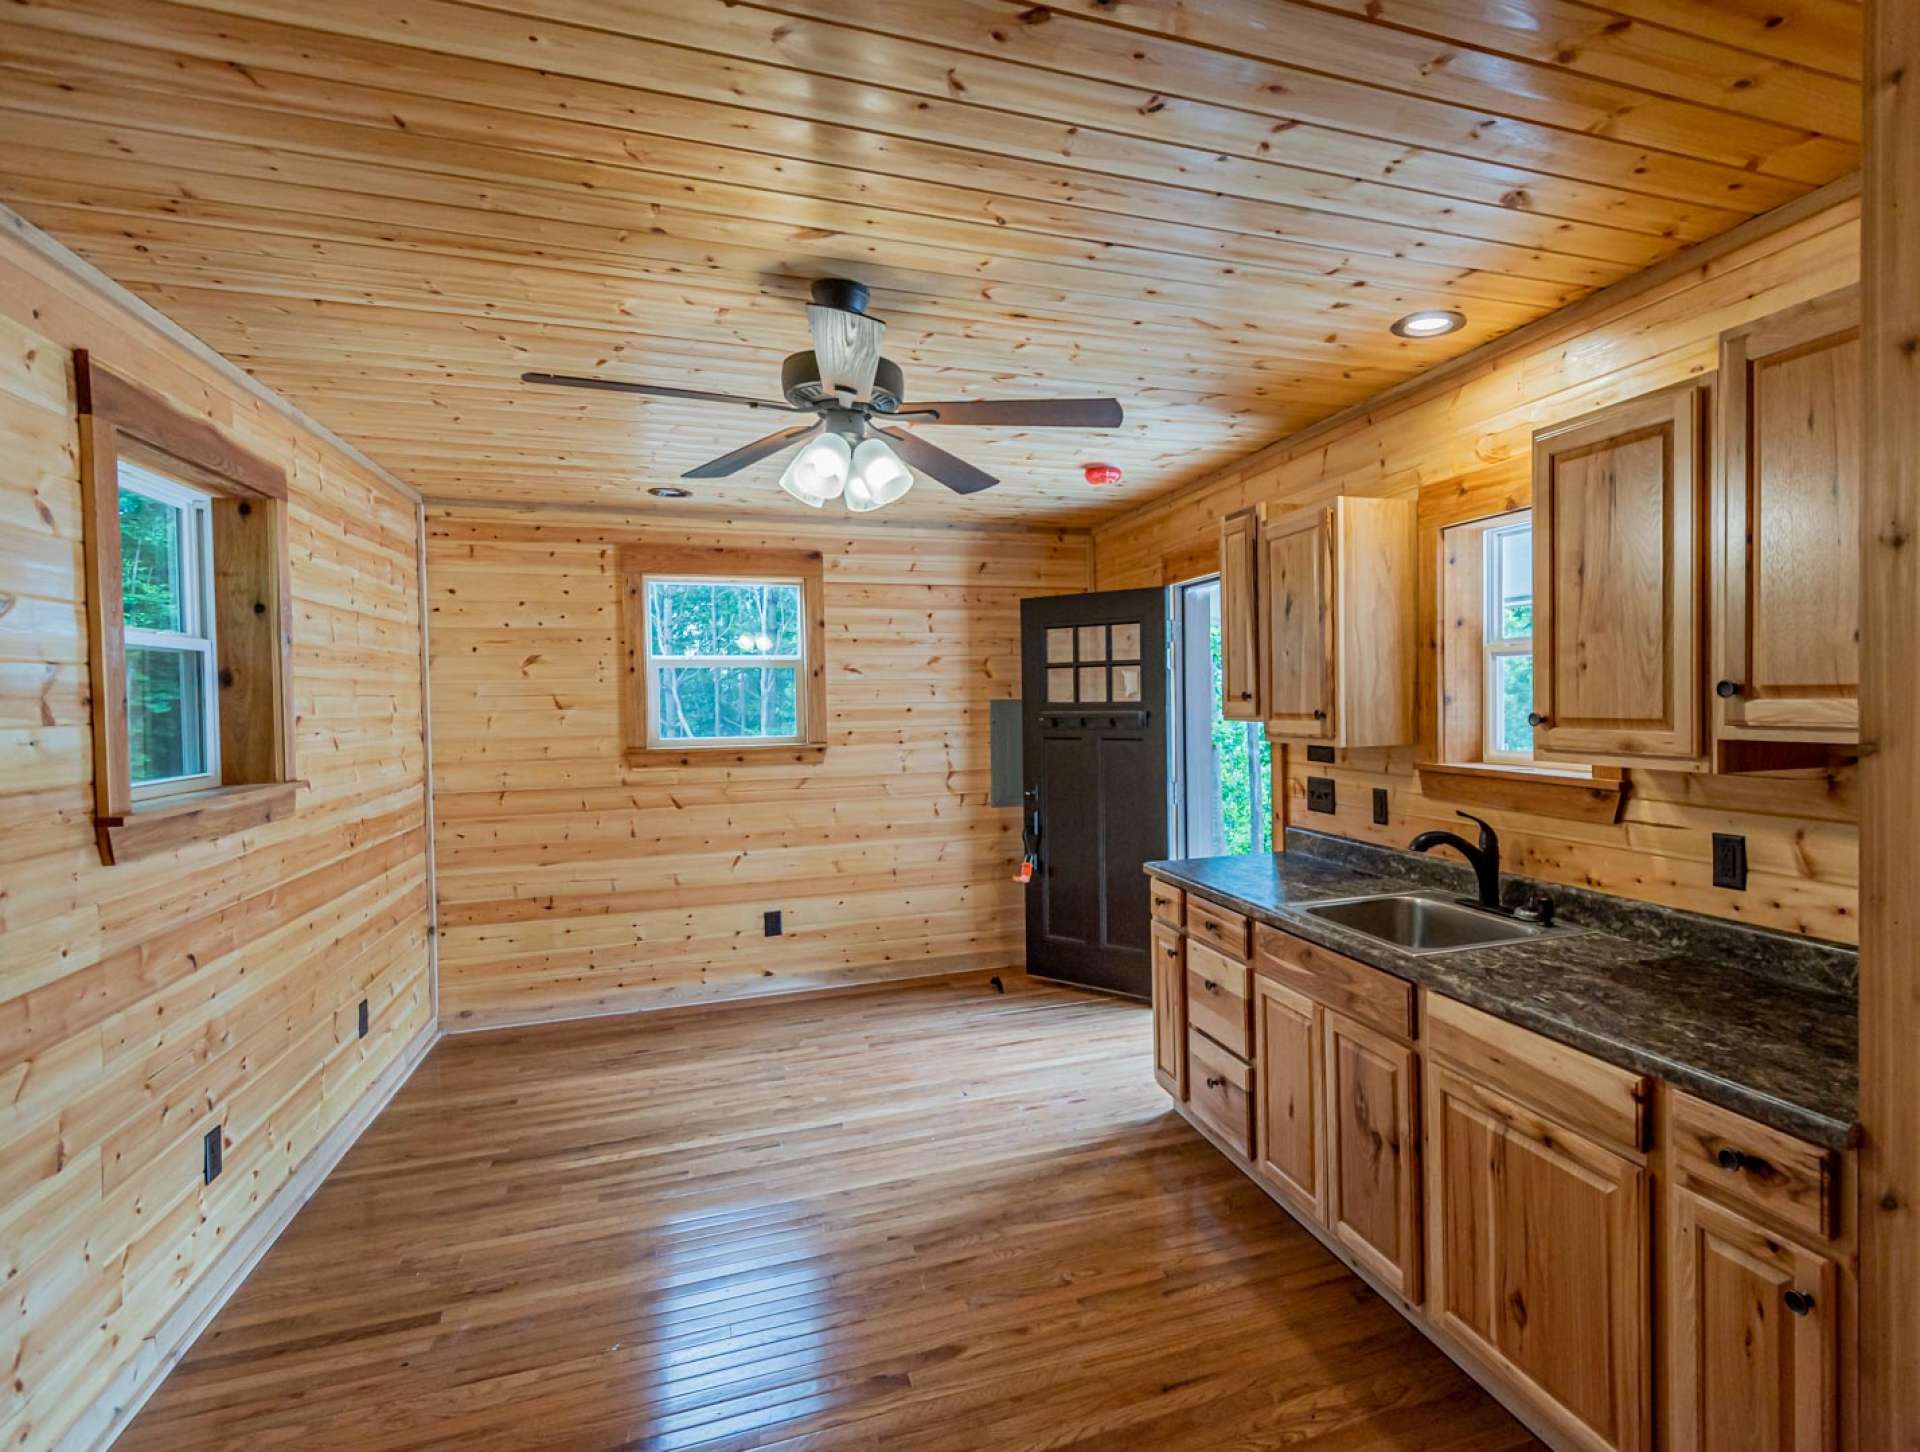 Second living quarters is 12' by 16' and offers space for bed,  a kitchenette, and a full bath.  This private space will thrill your overnight guests.